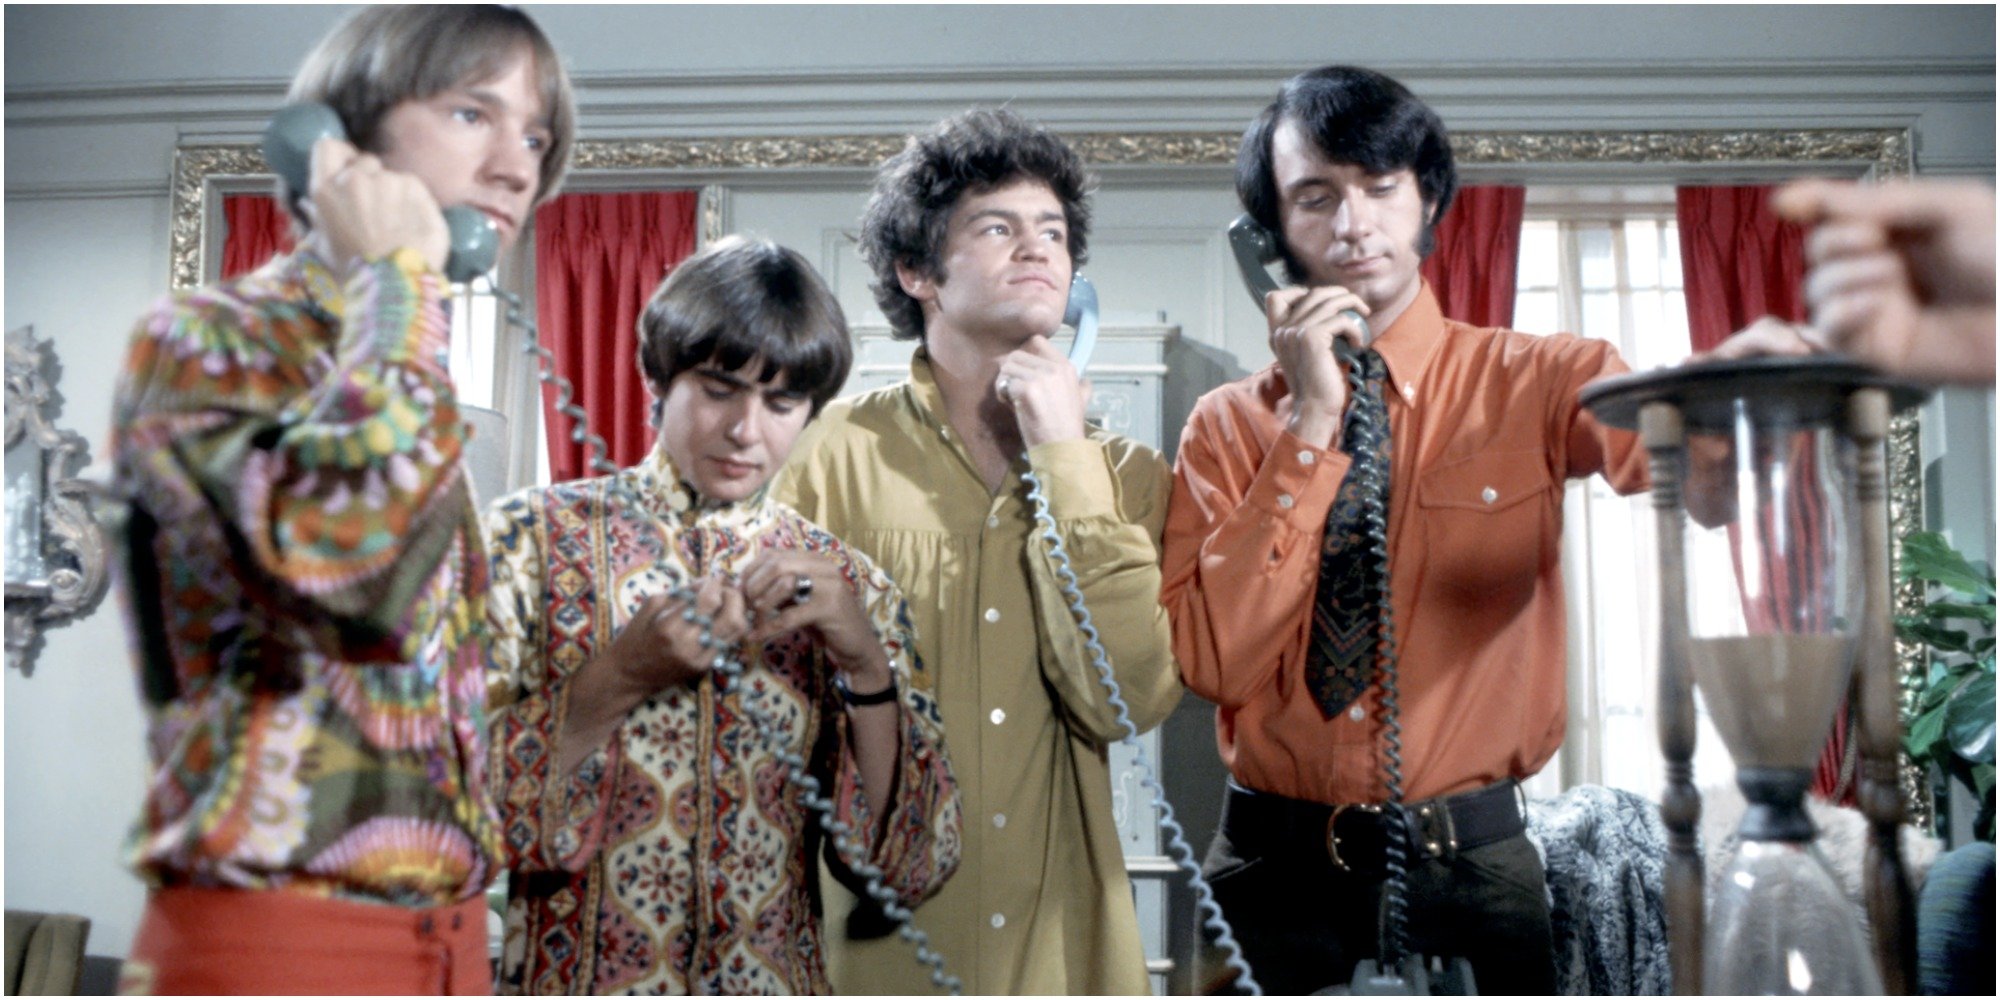 The cast of The Monkees each holds a telephone to their ears.